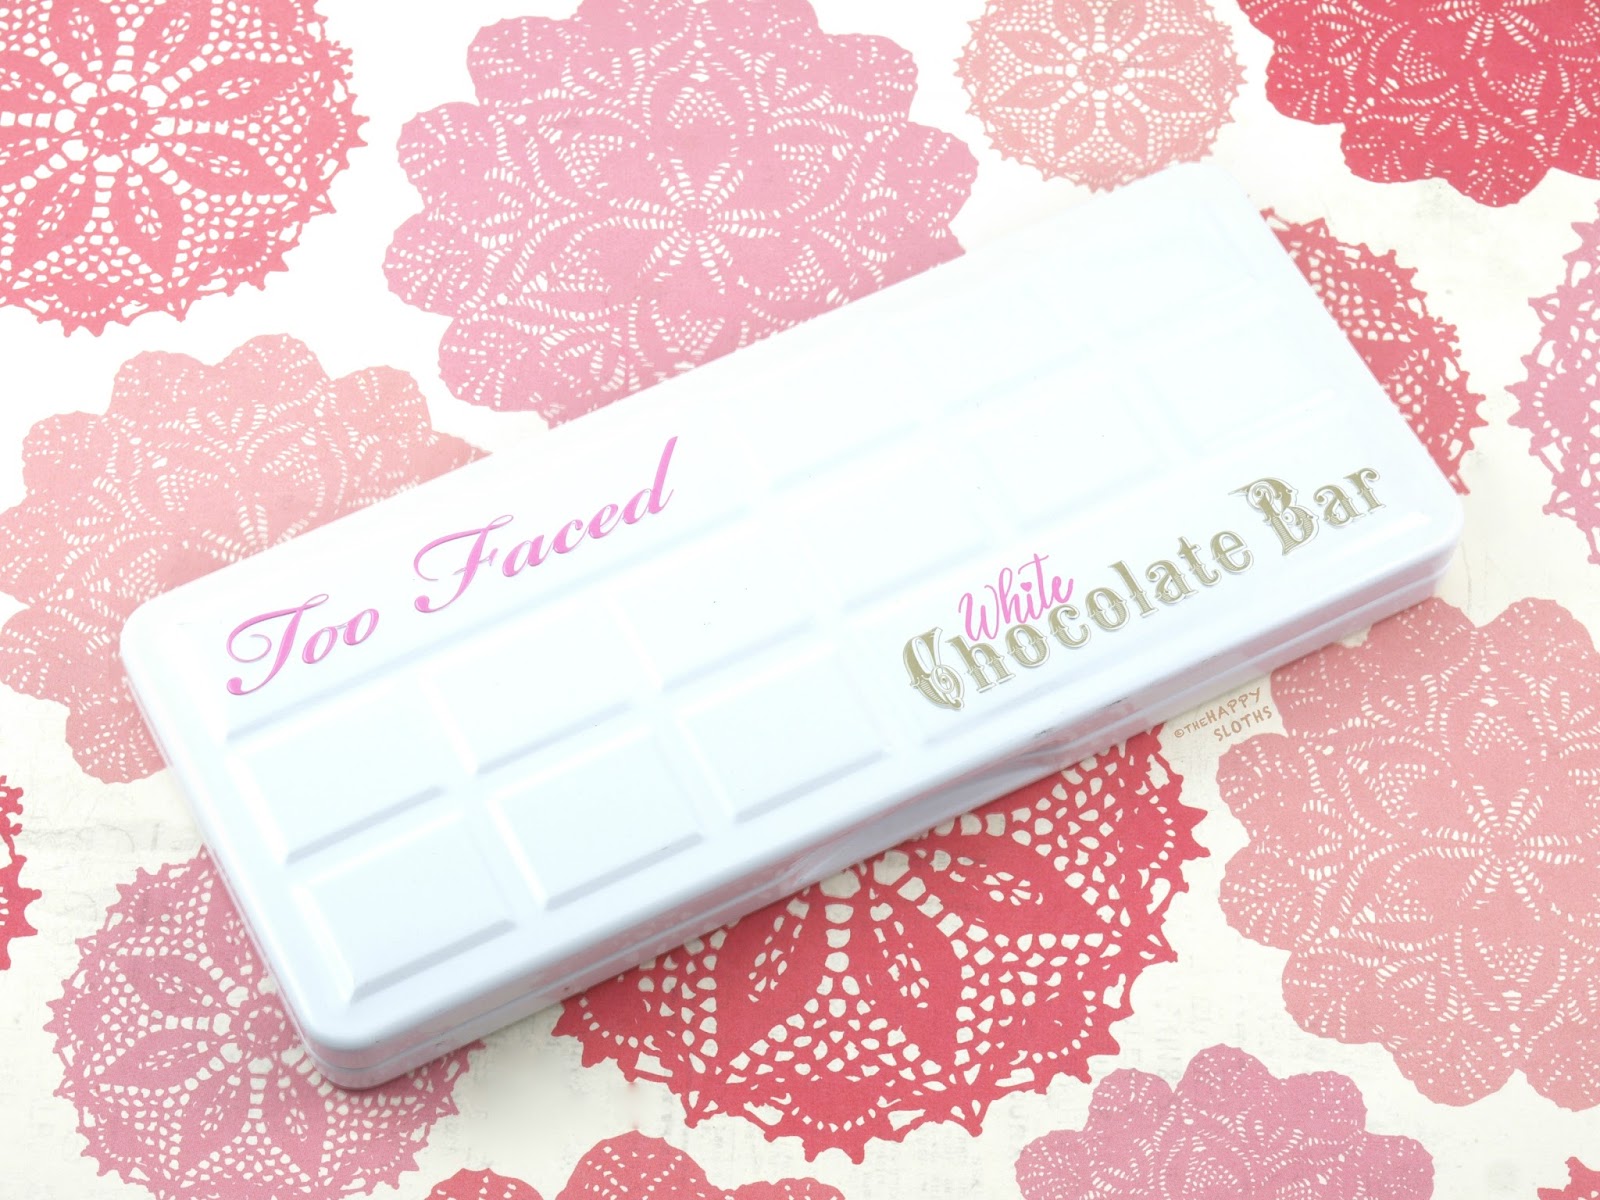 Too Faced White Chocolate Bar Eyeshadow Palette: Review and Swatches